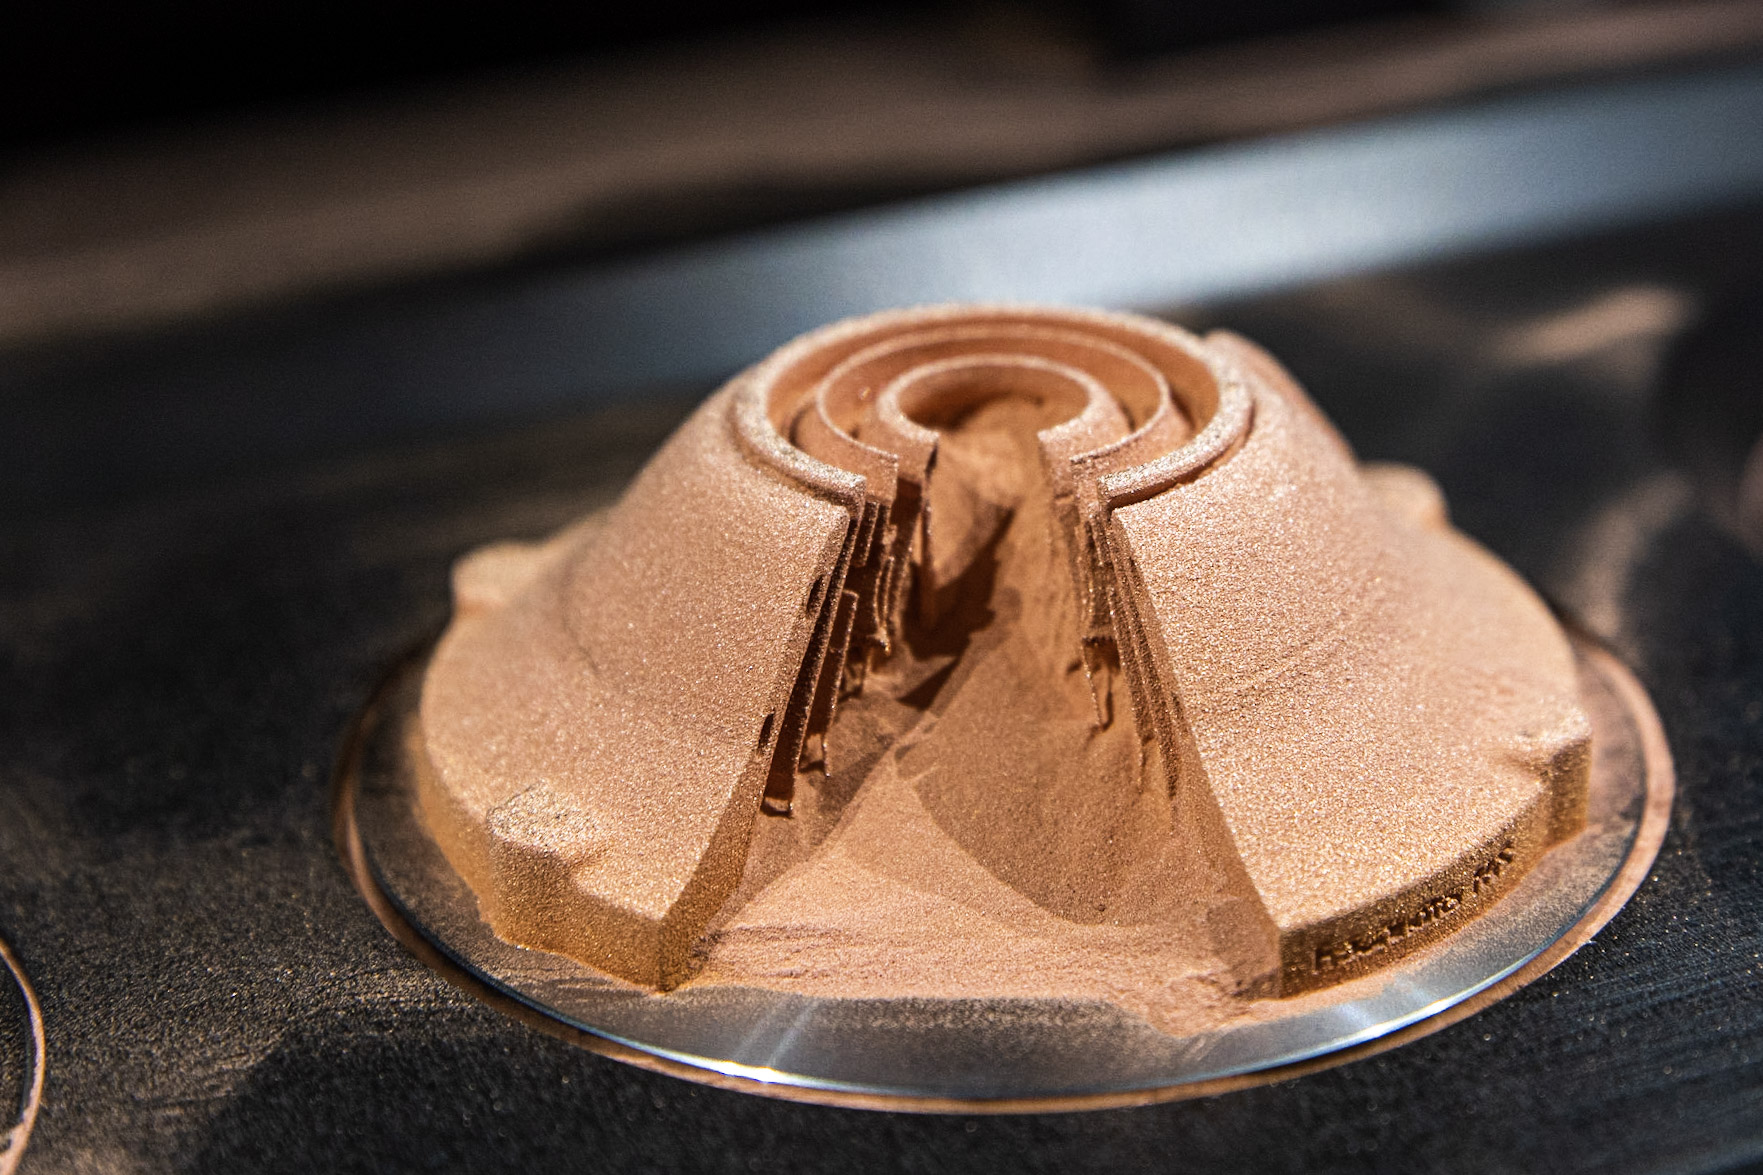 Additively manufactured coating head with filigree structures made of pure copper.